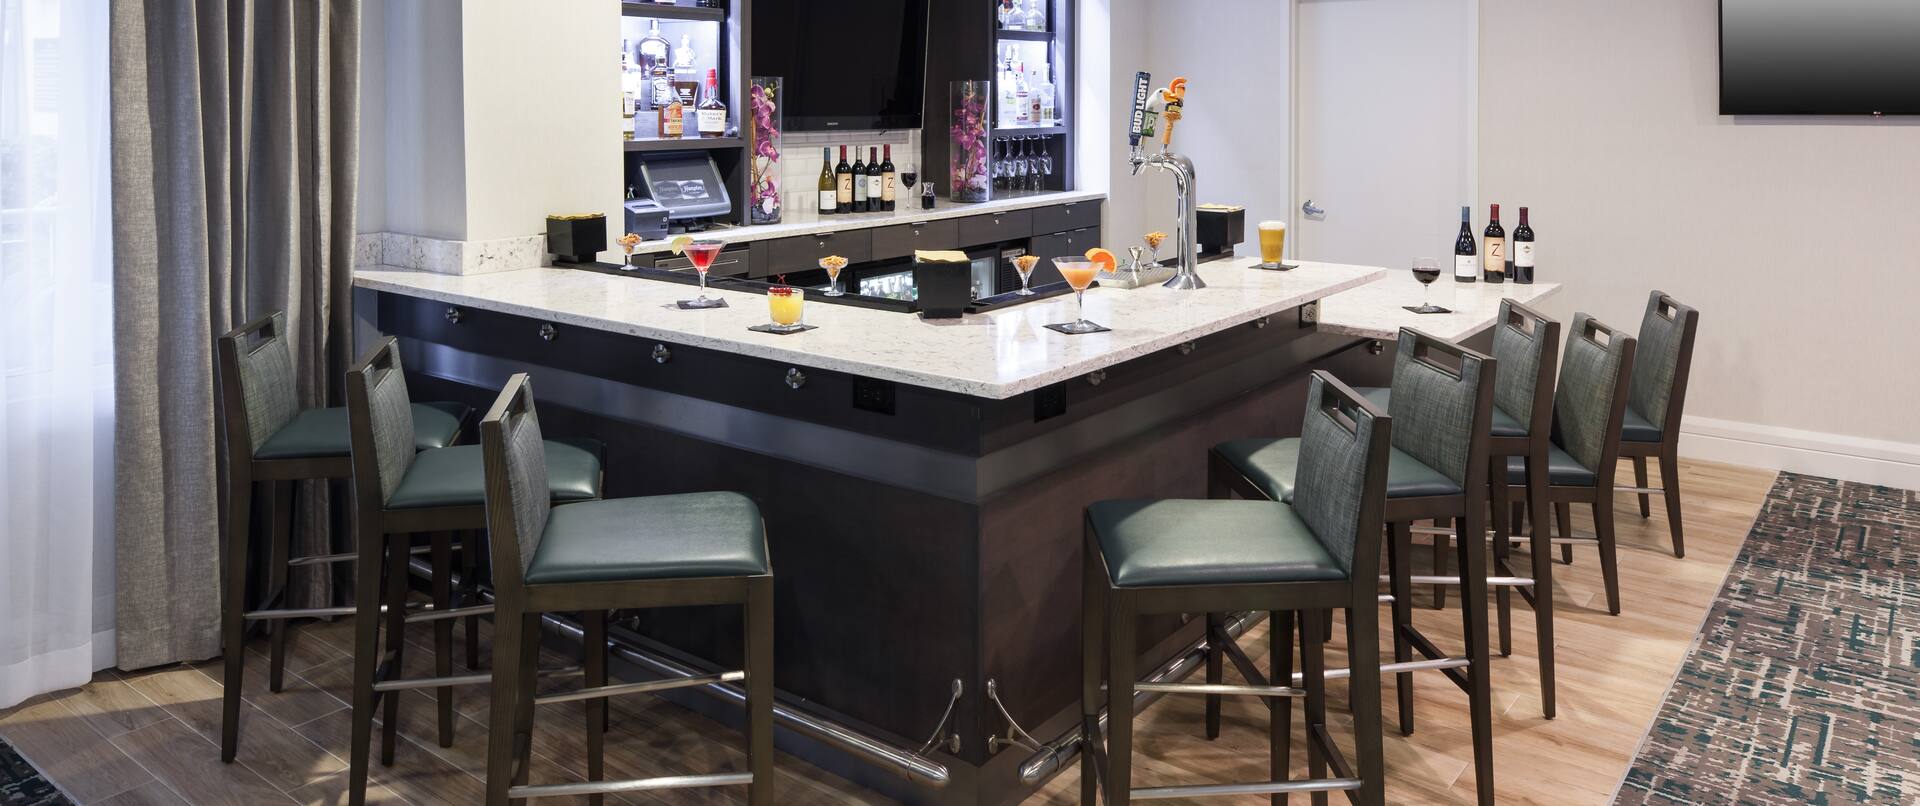  Bar Area With Stools